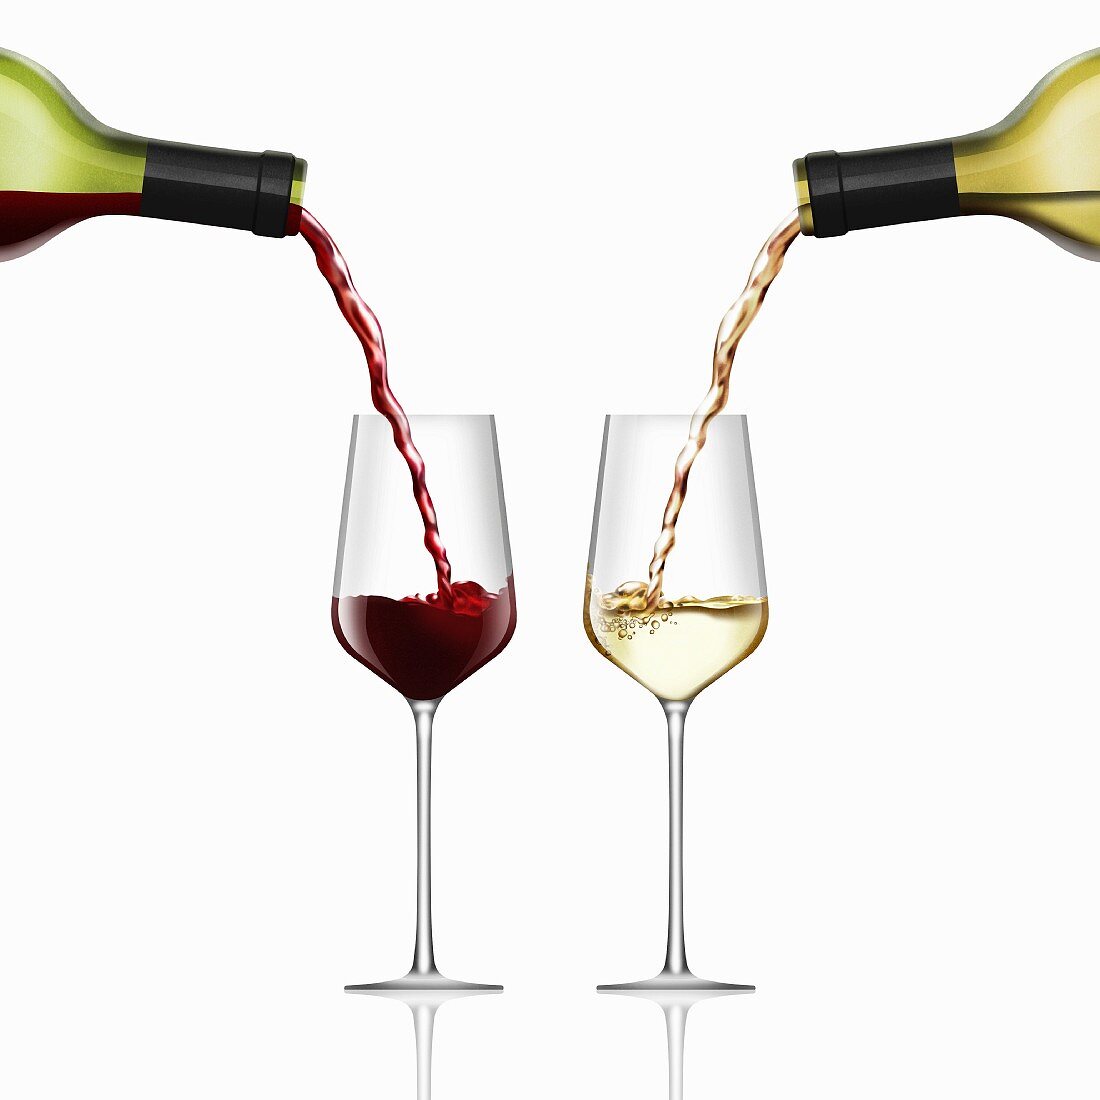 Red and white wine being poured into wine glasses side by side